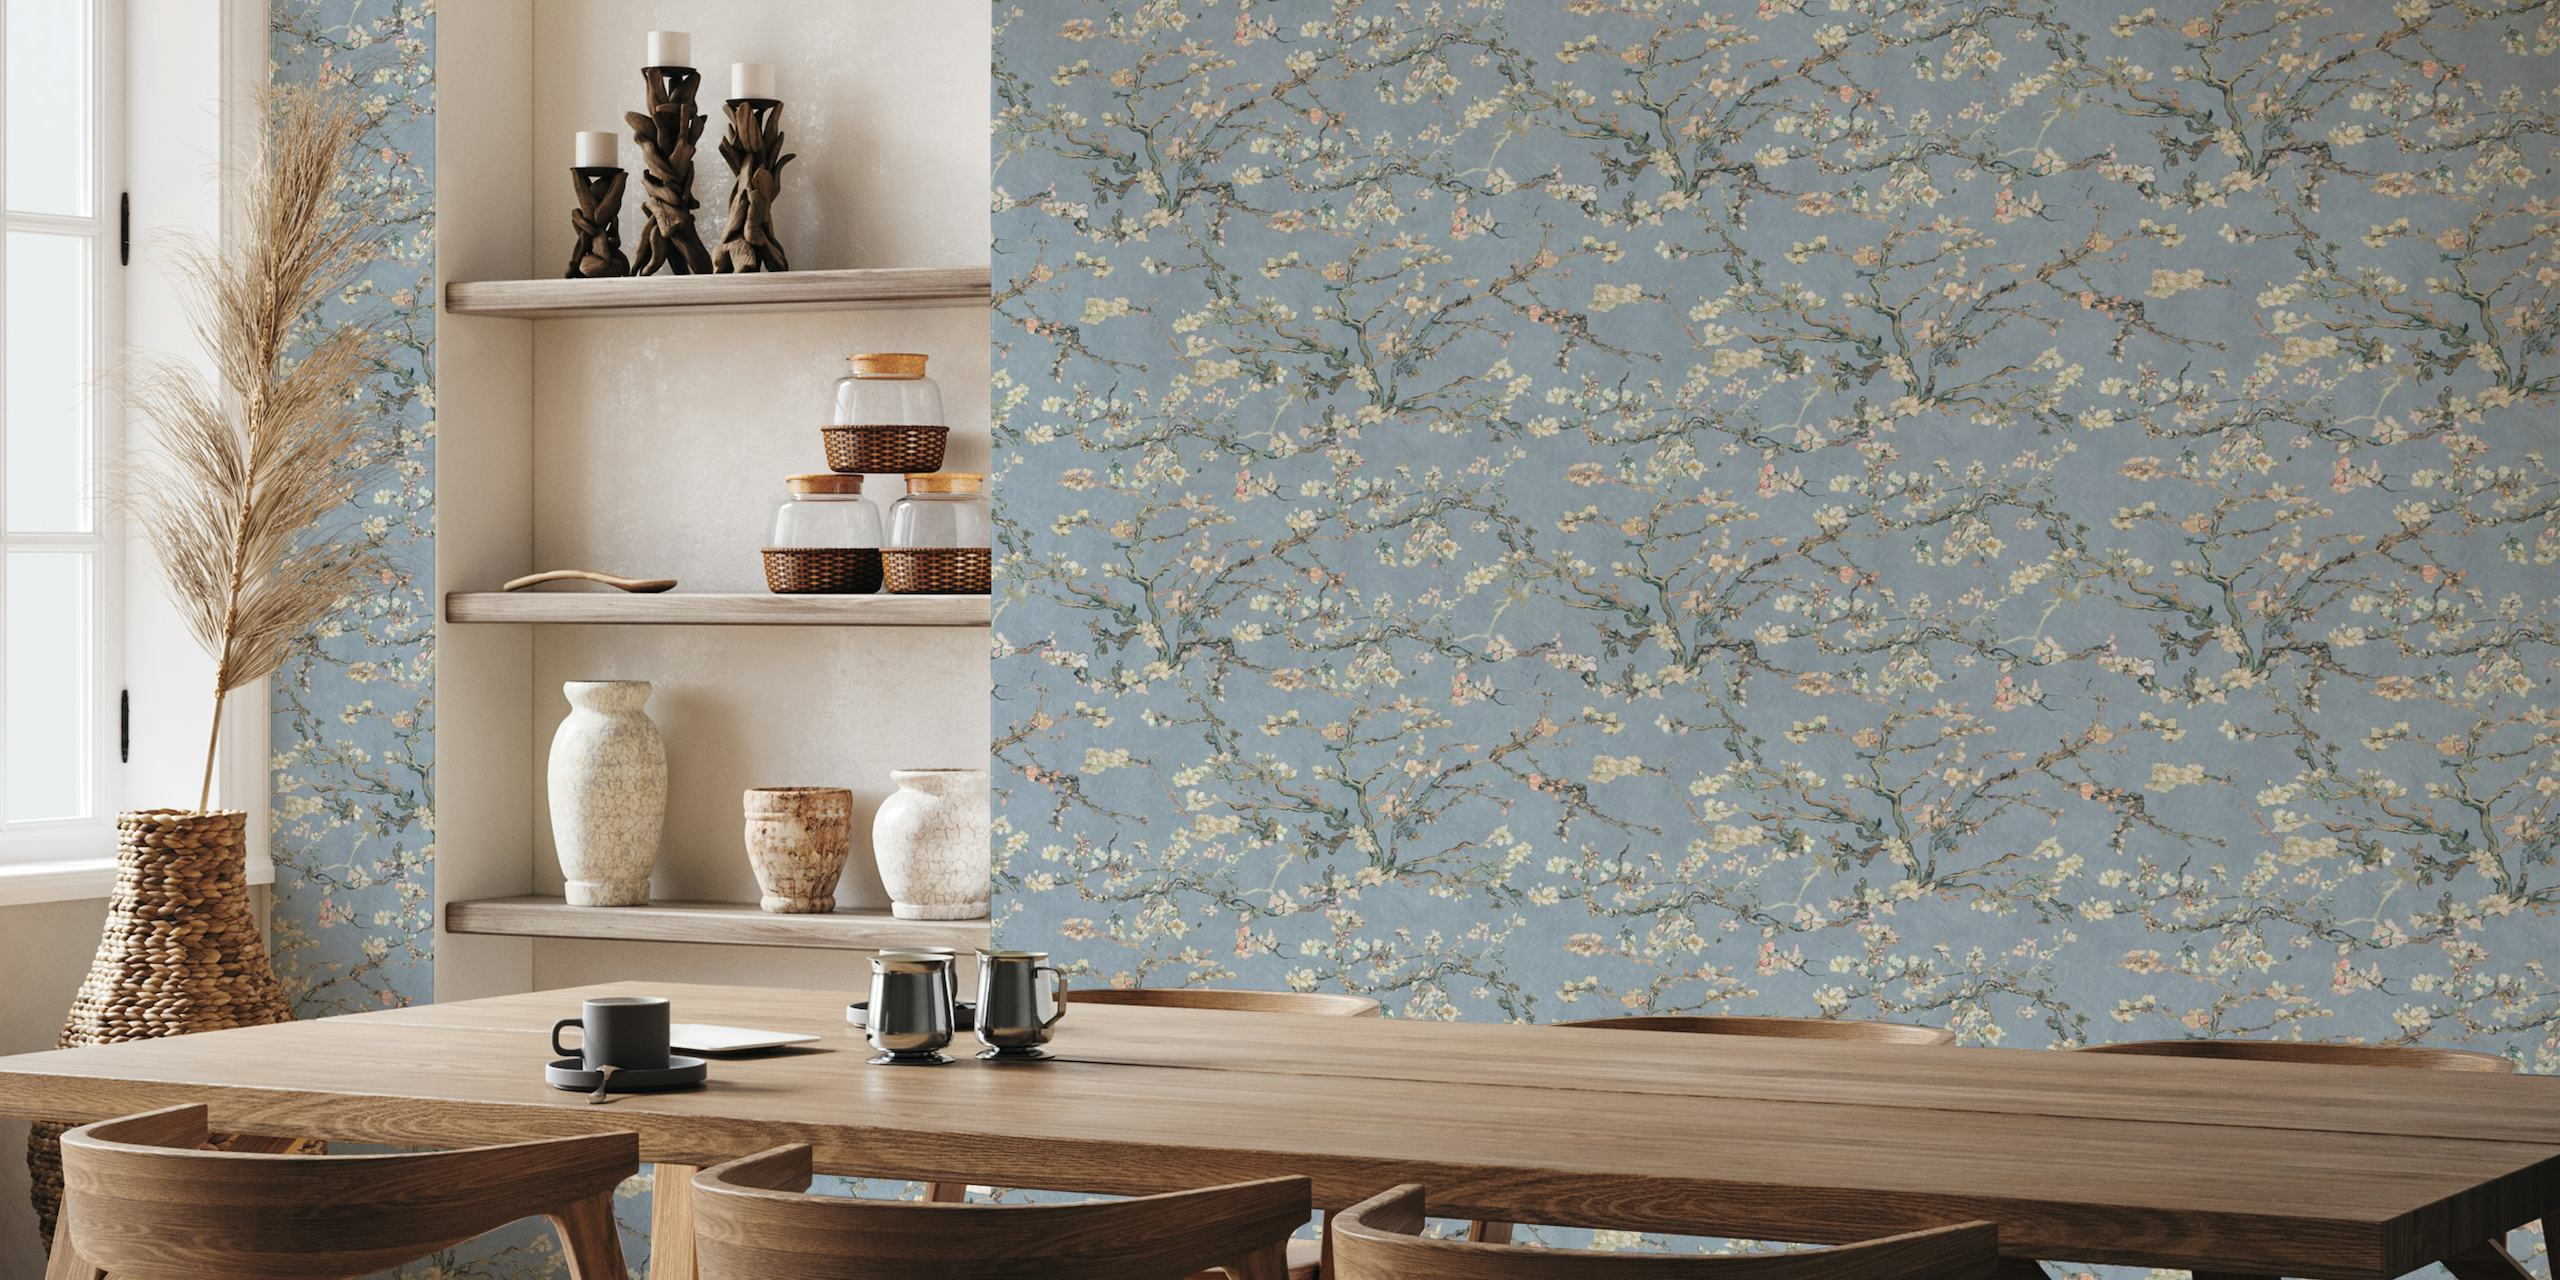 Van Gogh inspired Almond Blossom wall mural with pigeon blue, blush pink, and olive cream tones